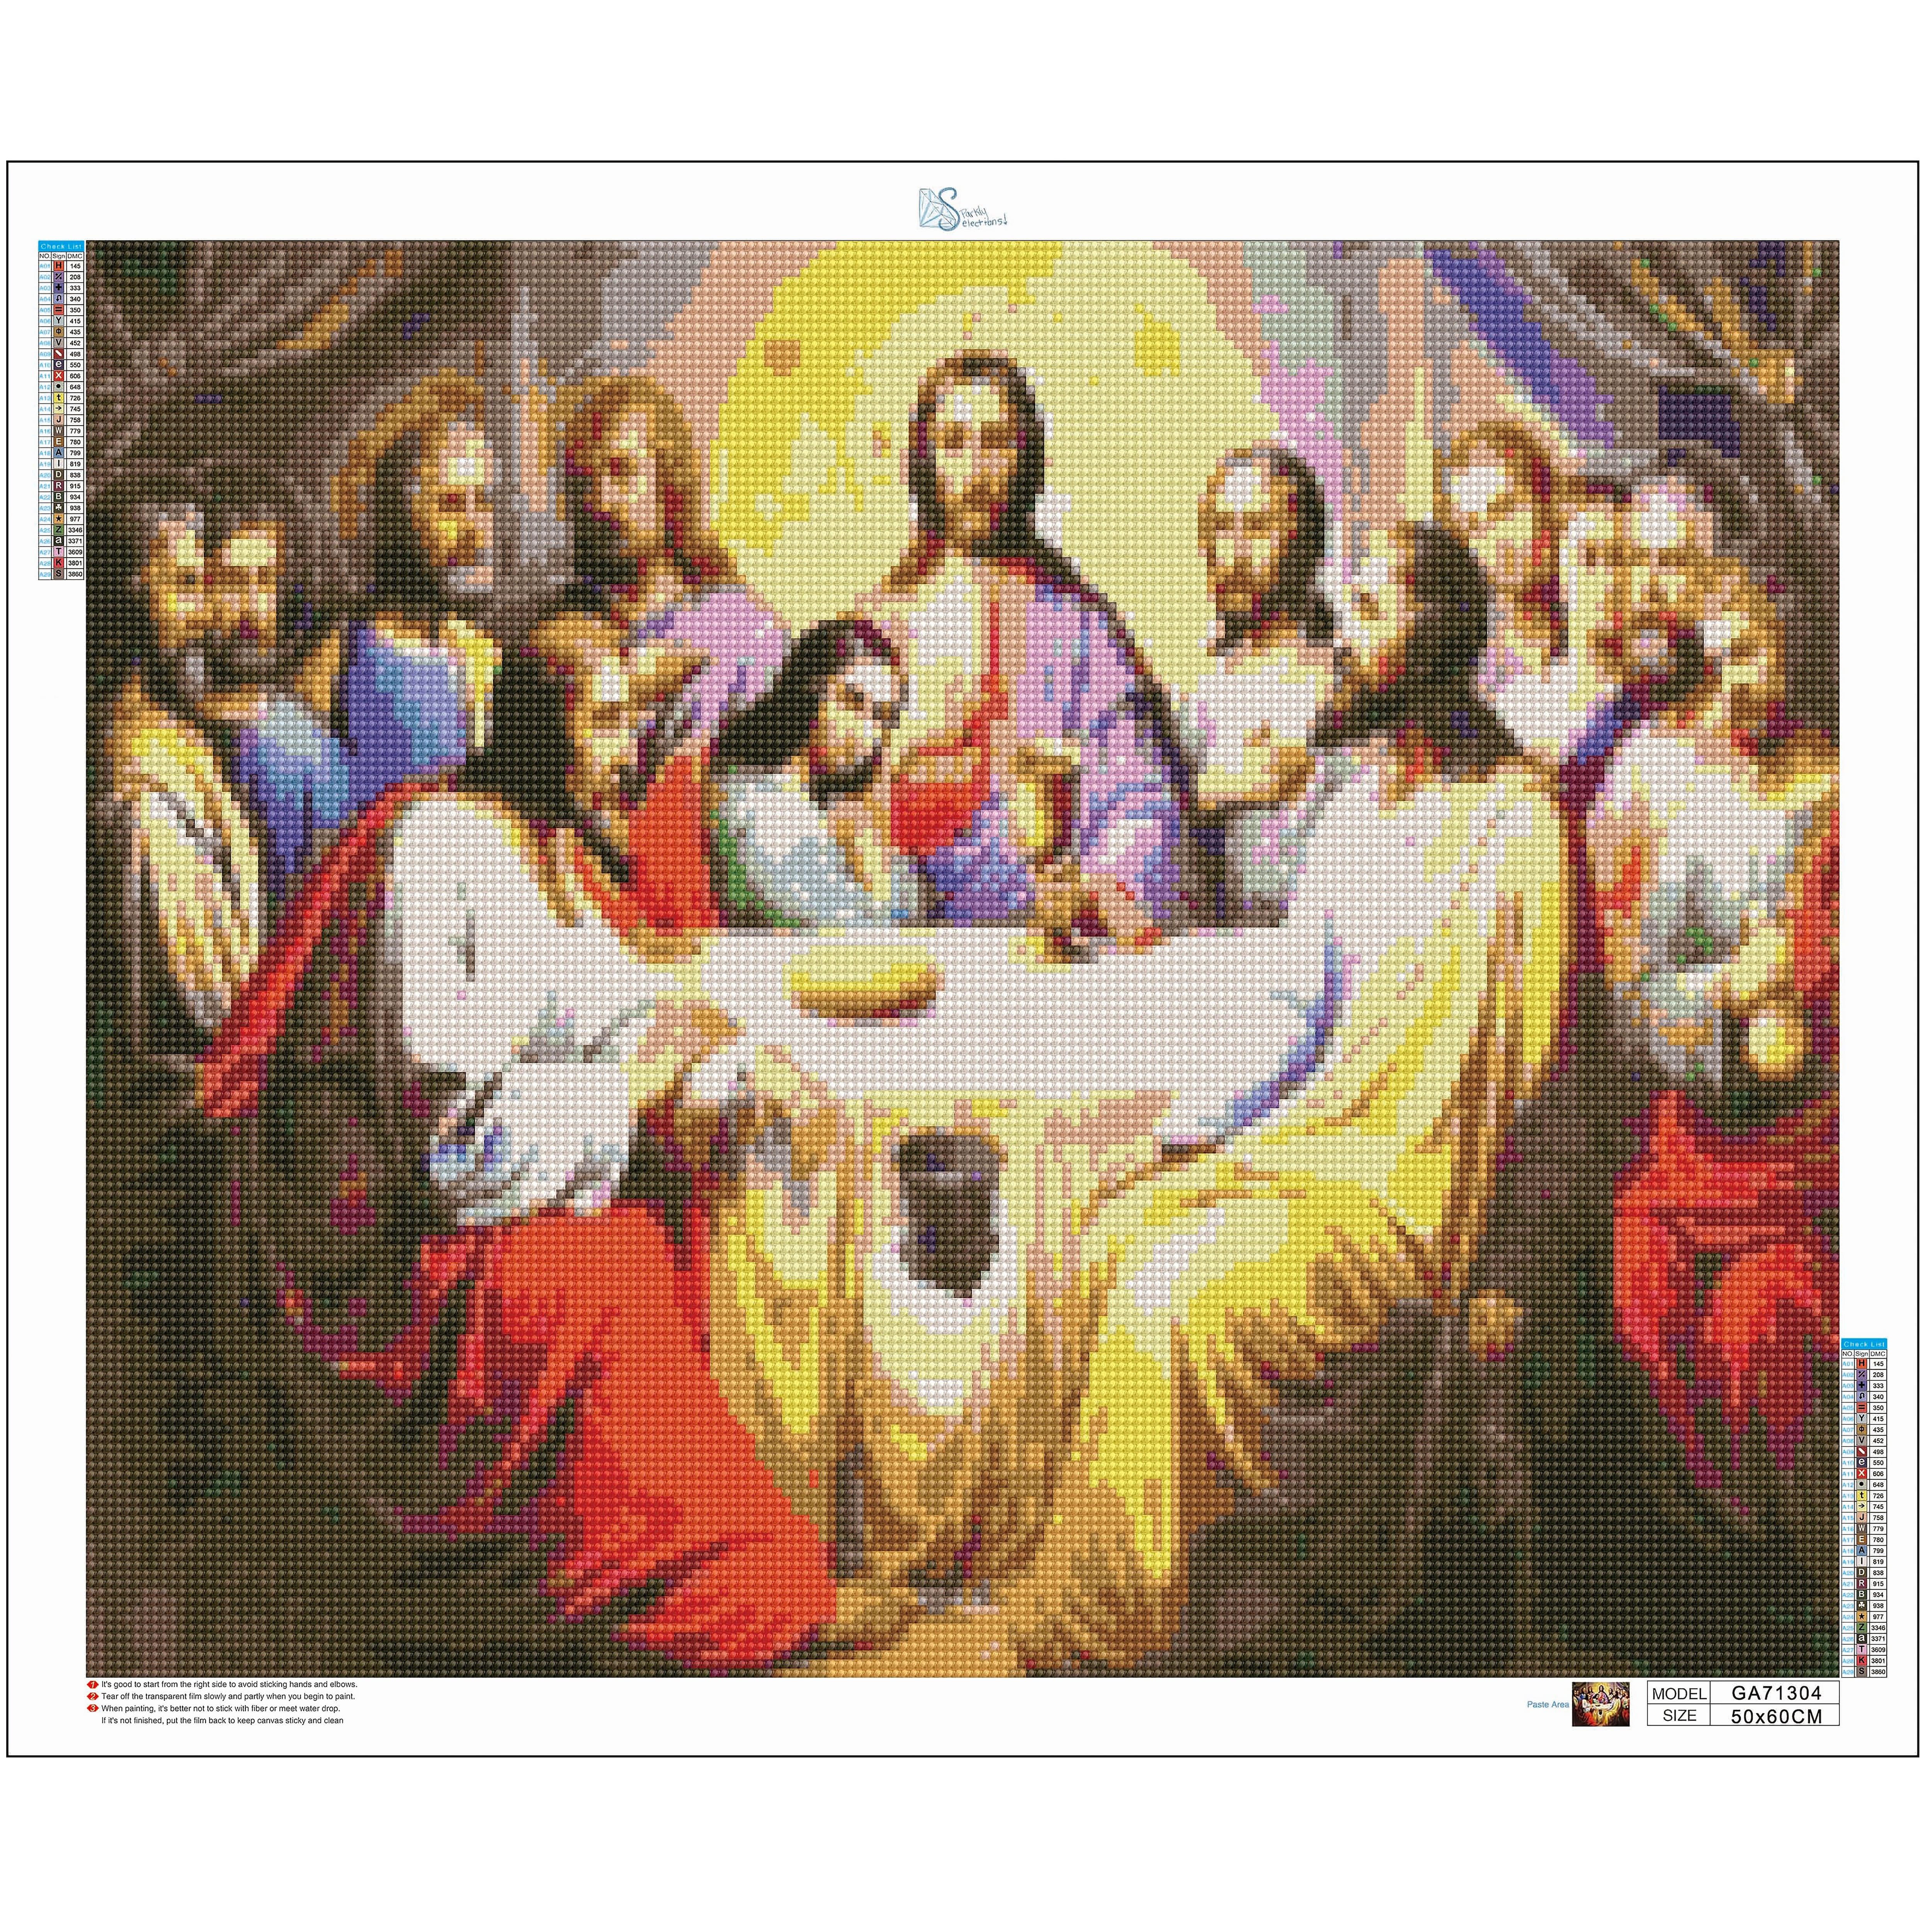 Sparkly Selections The Last Supper Diamond Painting Kit, Square Diamonds